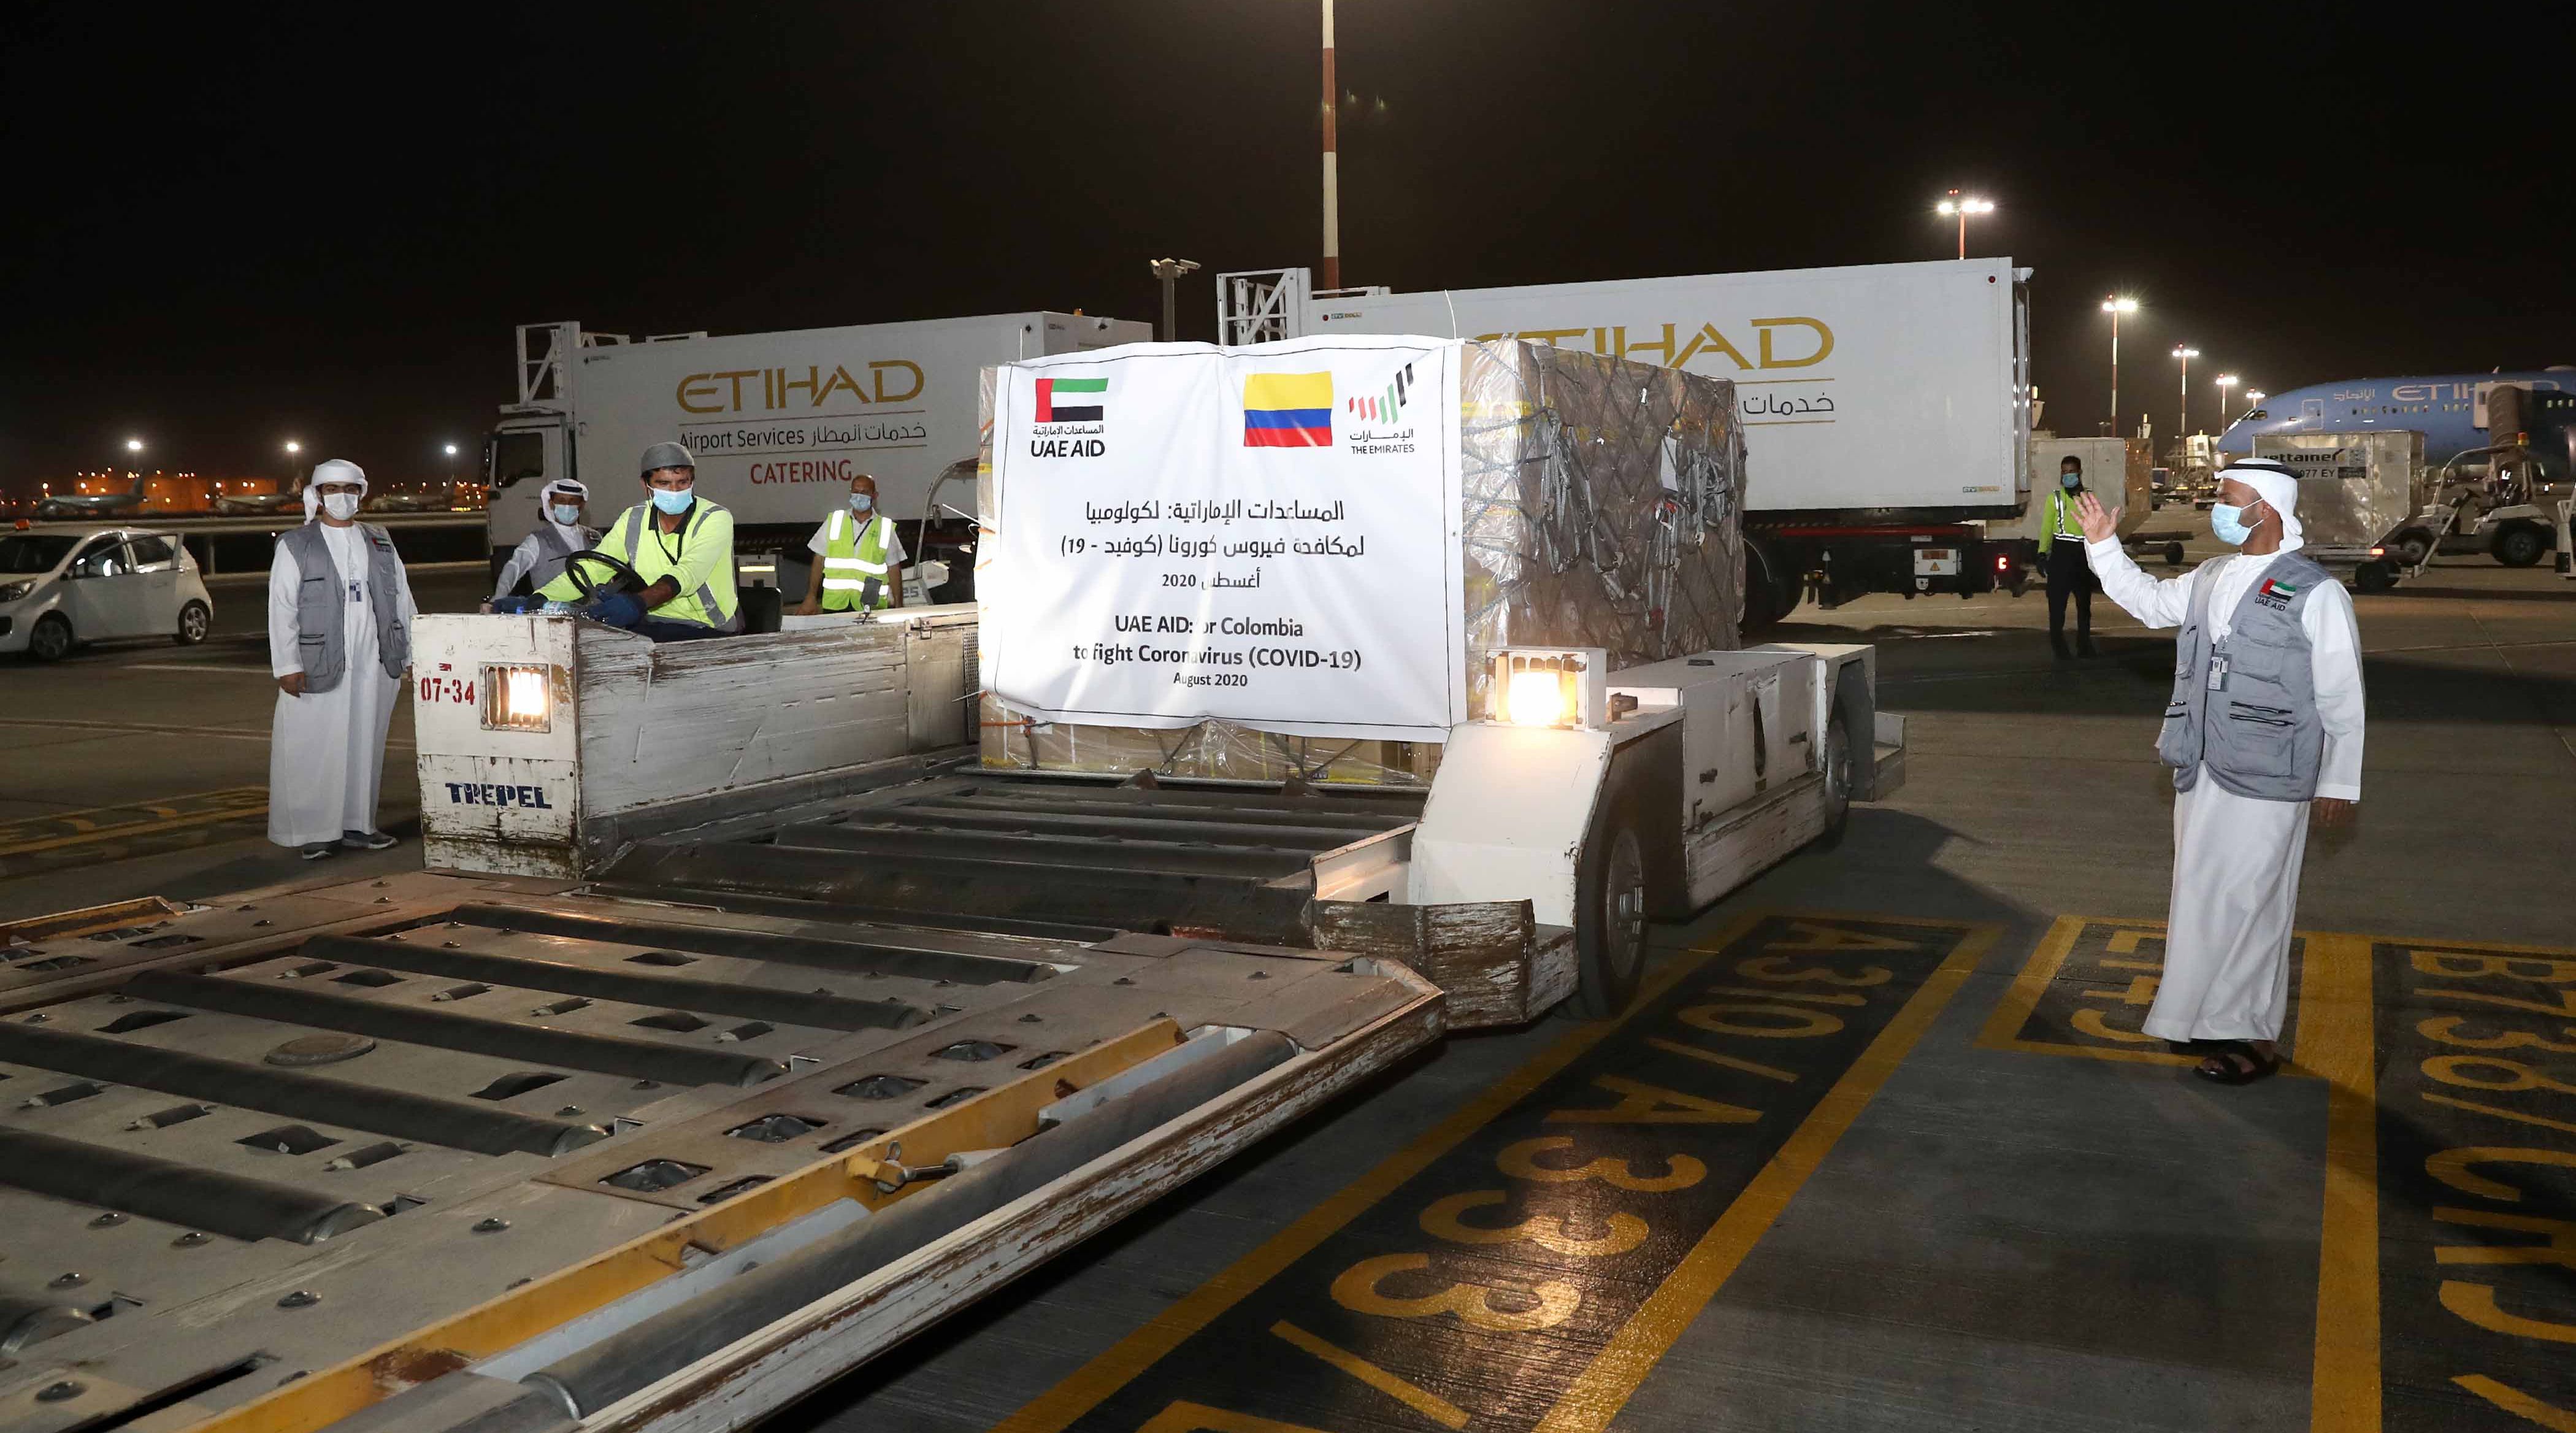 "UAE sends fourth medical aid plane to Colombia in fight against COVID-19 "